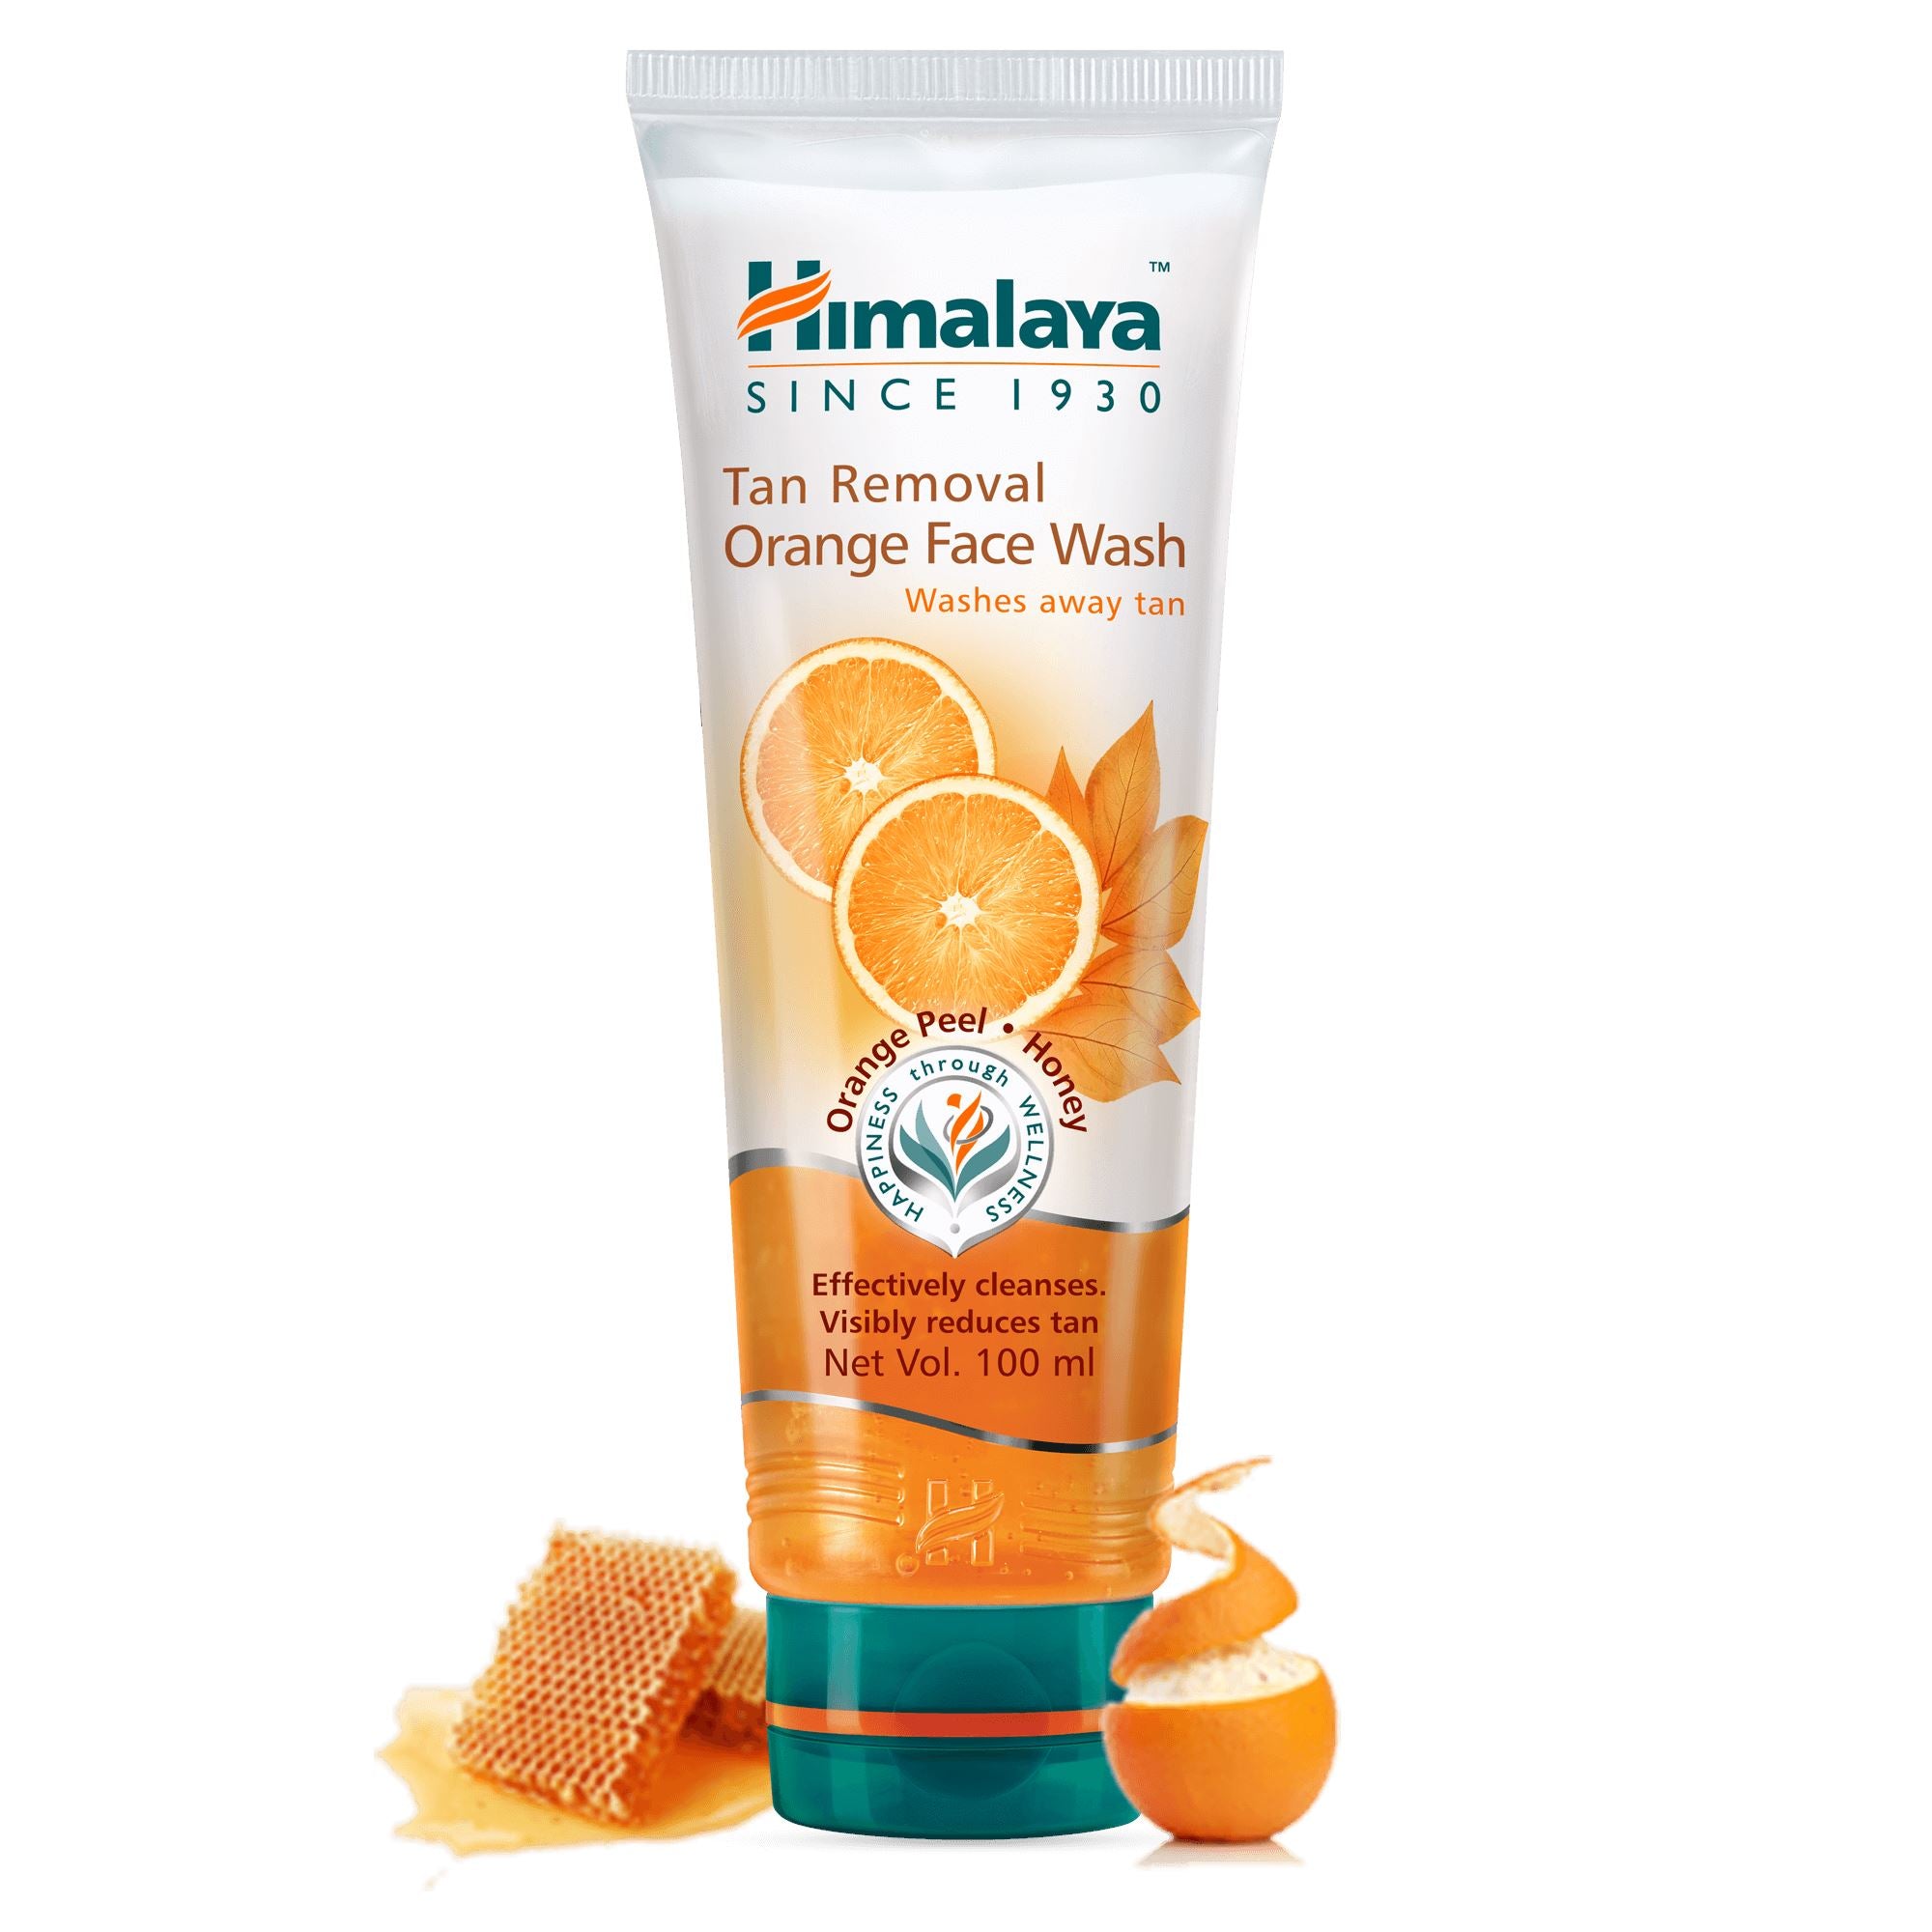 Himalaya Tan Removal Orange Face Wash - Effectively Cleanses and Visibly Reduces Tan